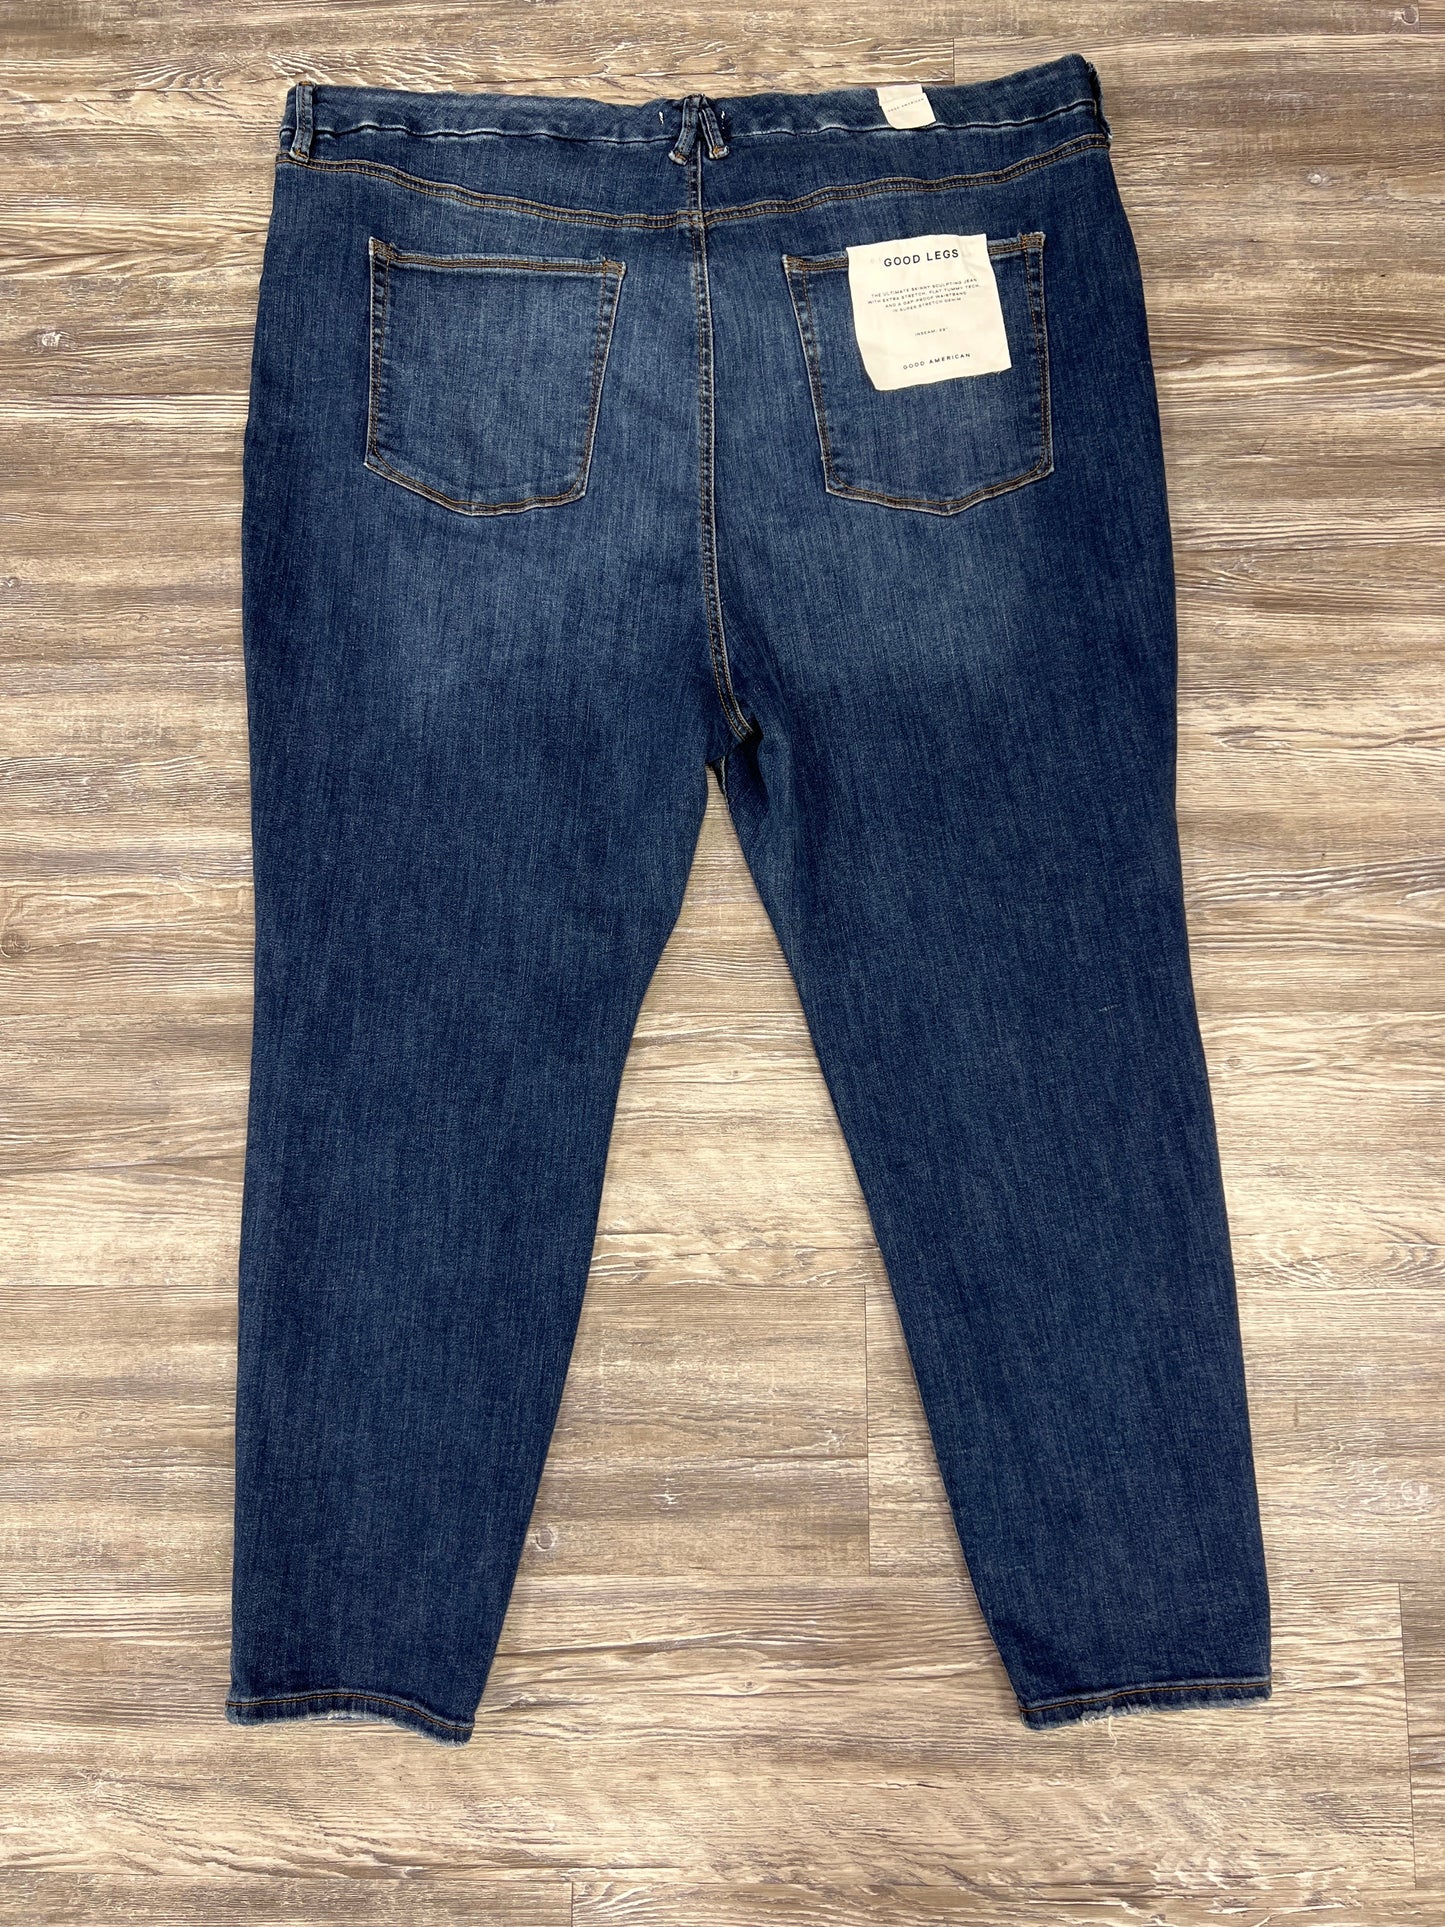 Jeans Designer By Good American Size: 30